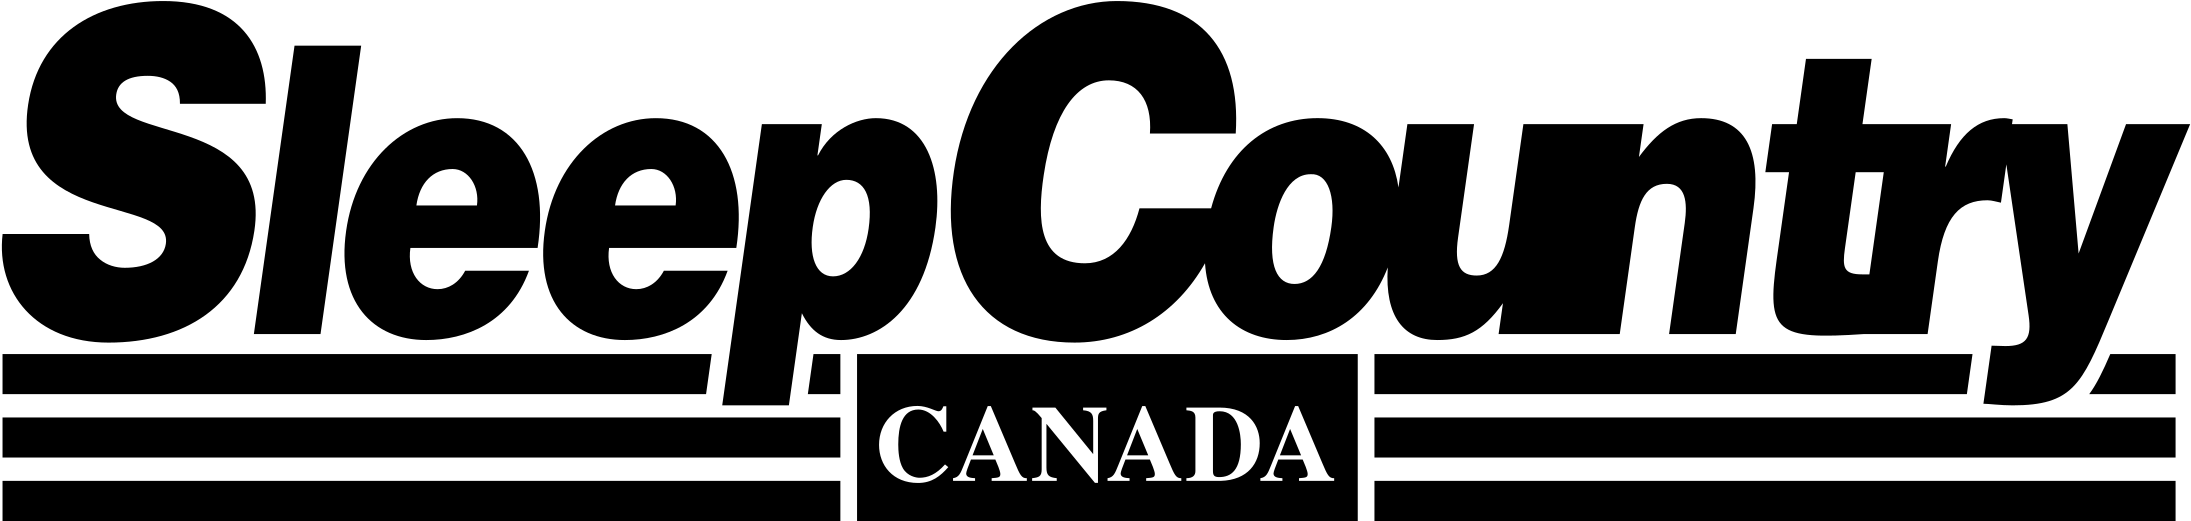 Sleep Country Logo Png Transparent - Sleep Country Canada (2400x2400), Png Download